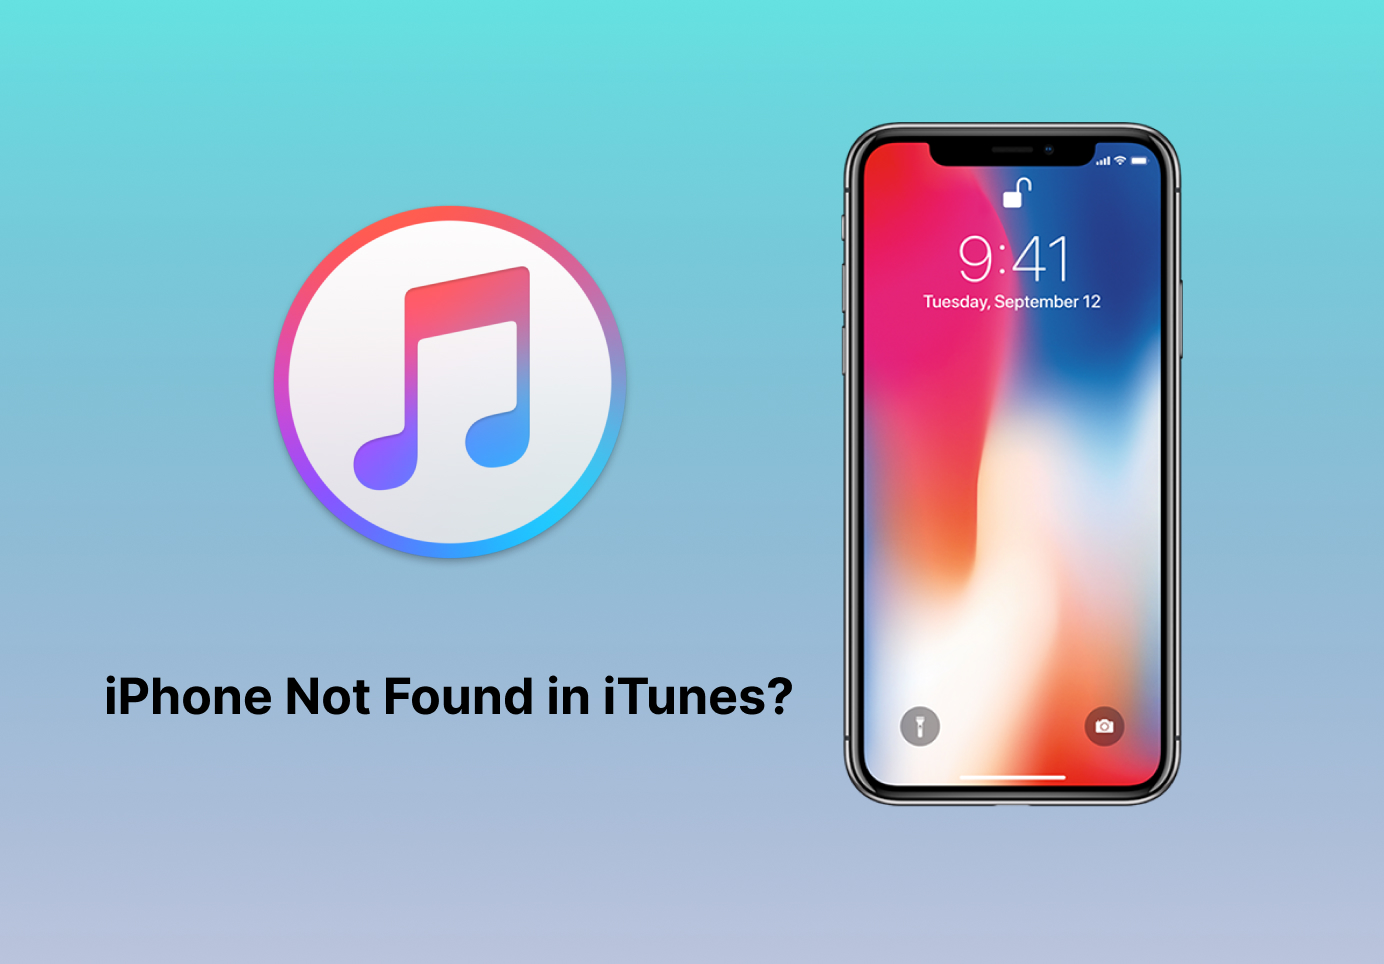 6 Easy Fixes to iPhone Not Found in iTunes